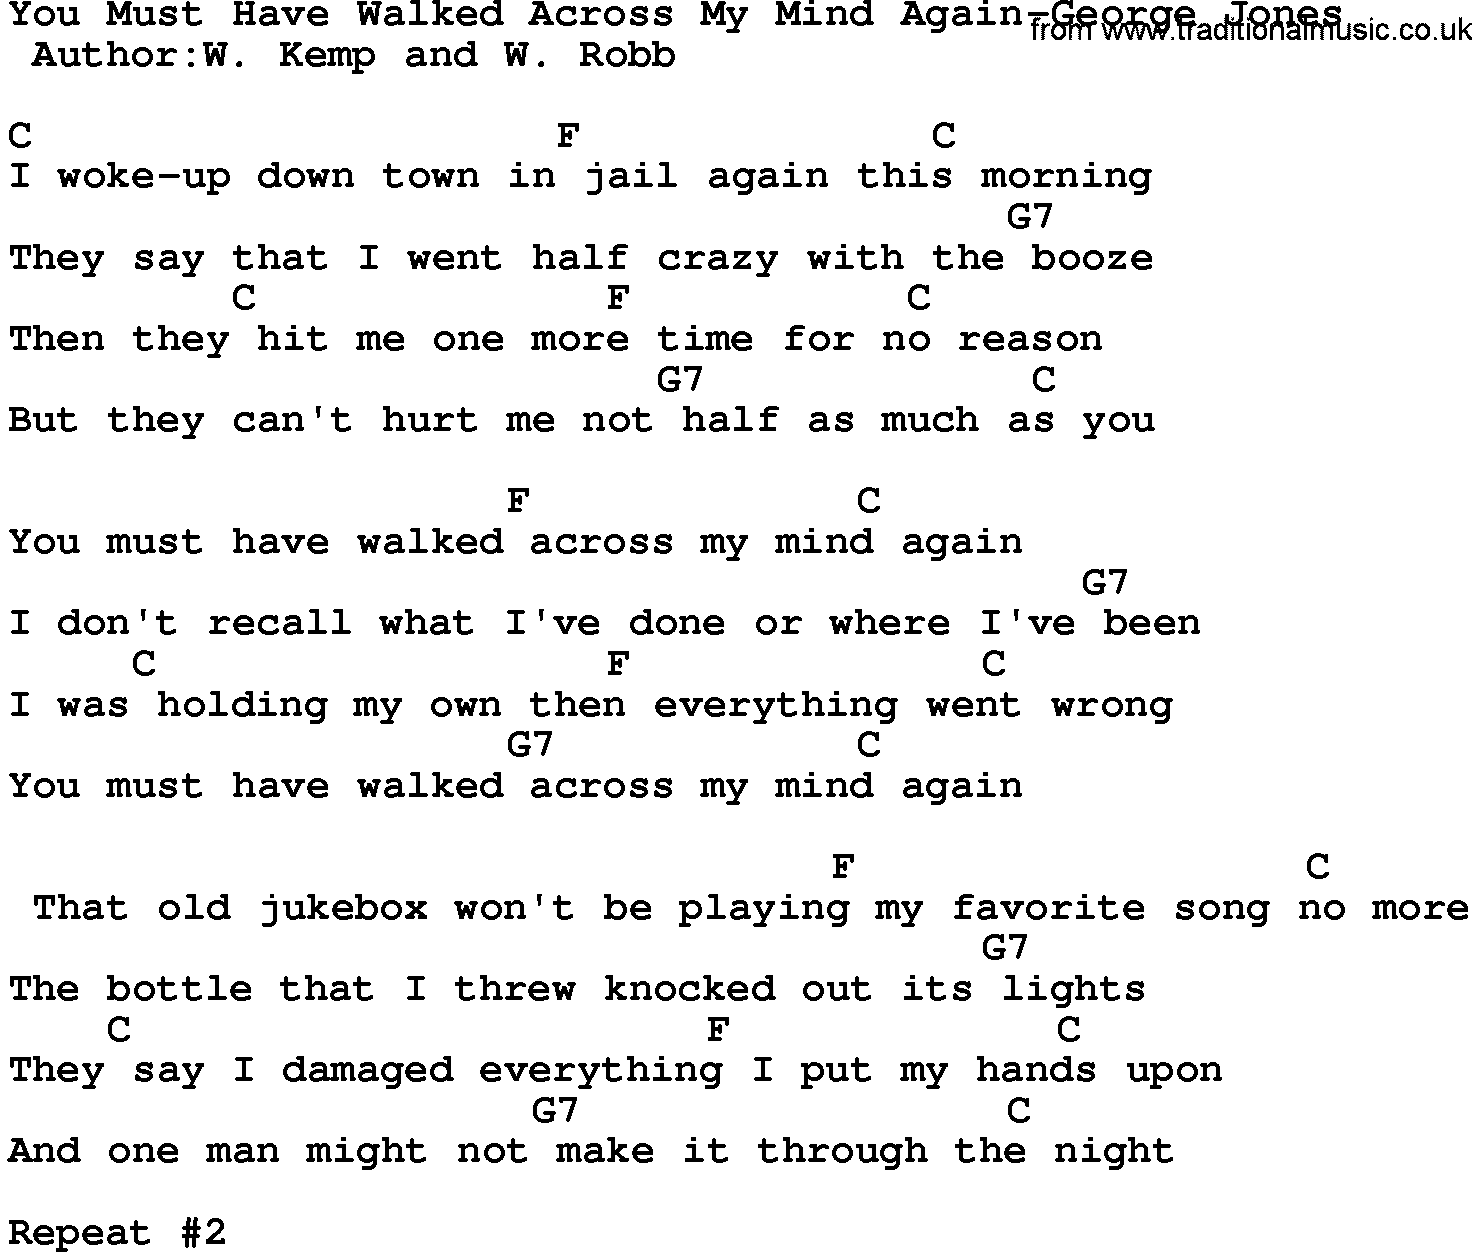 Country music song: You Must Have Walked Across My Mind Again-George Jones lyrics and chords